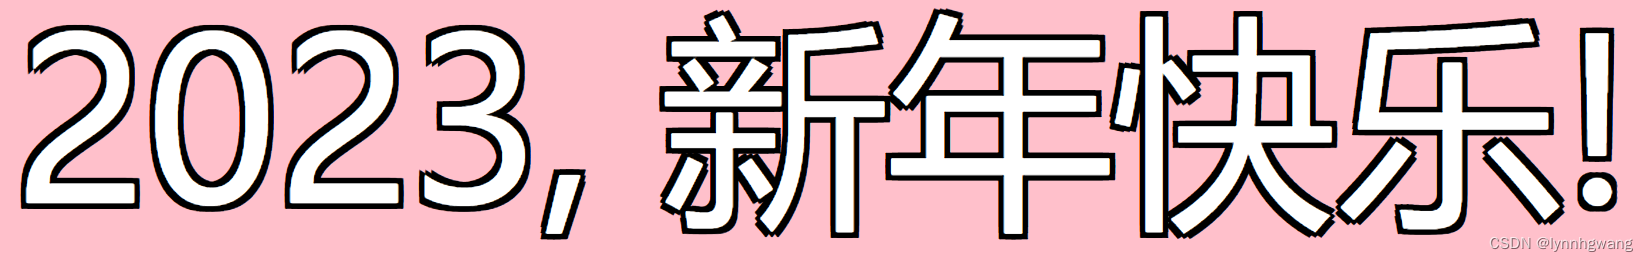 【CSS】文字<span style='color:red;'>描</span><span style='color:red;'>边</span><span style='color:red;'>的</span>三种<span style='color:red;'>实现</span>方式